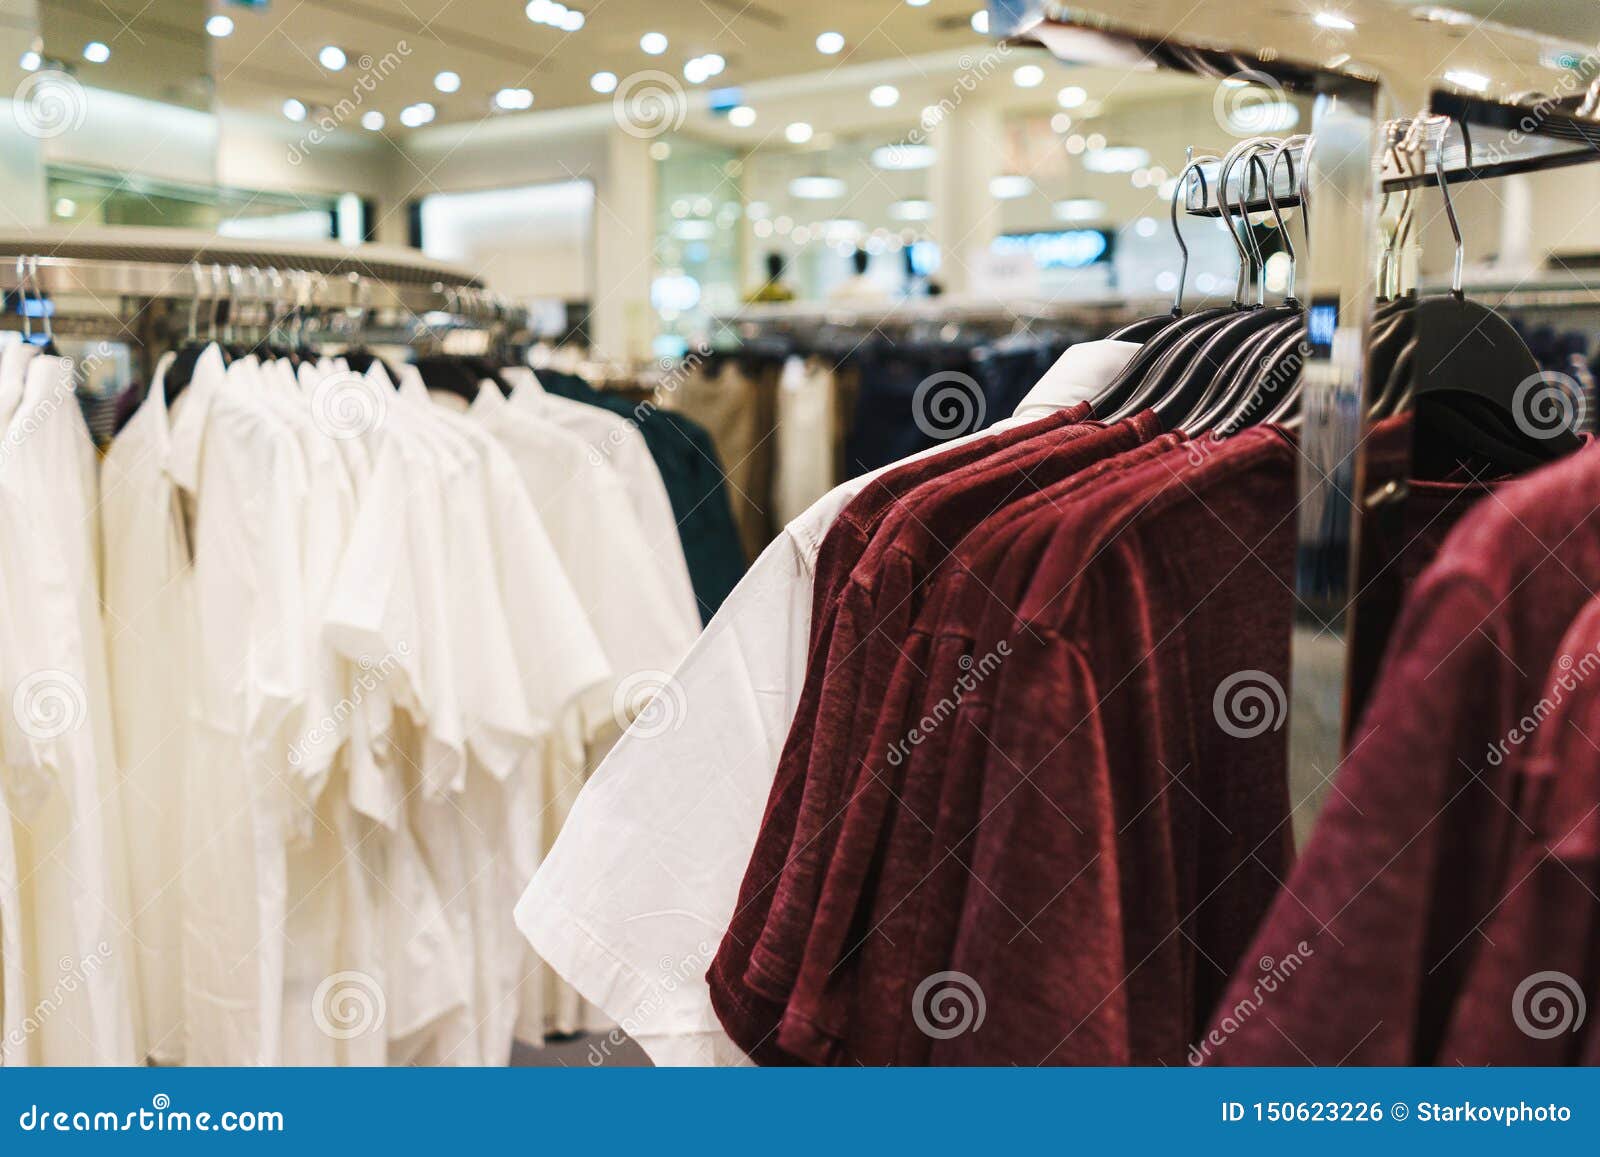 Hangers Bright Fashionable Clothes. T-shirts, Blouses and Shirts on a ...